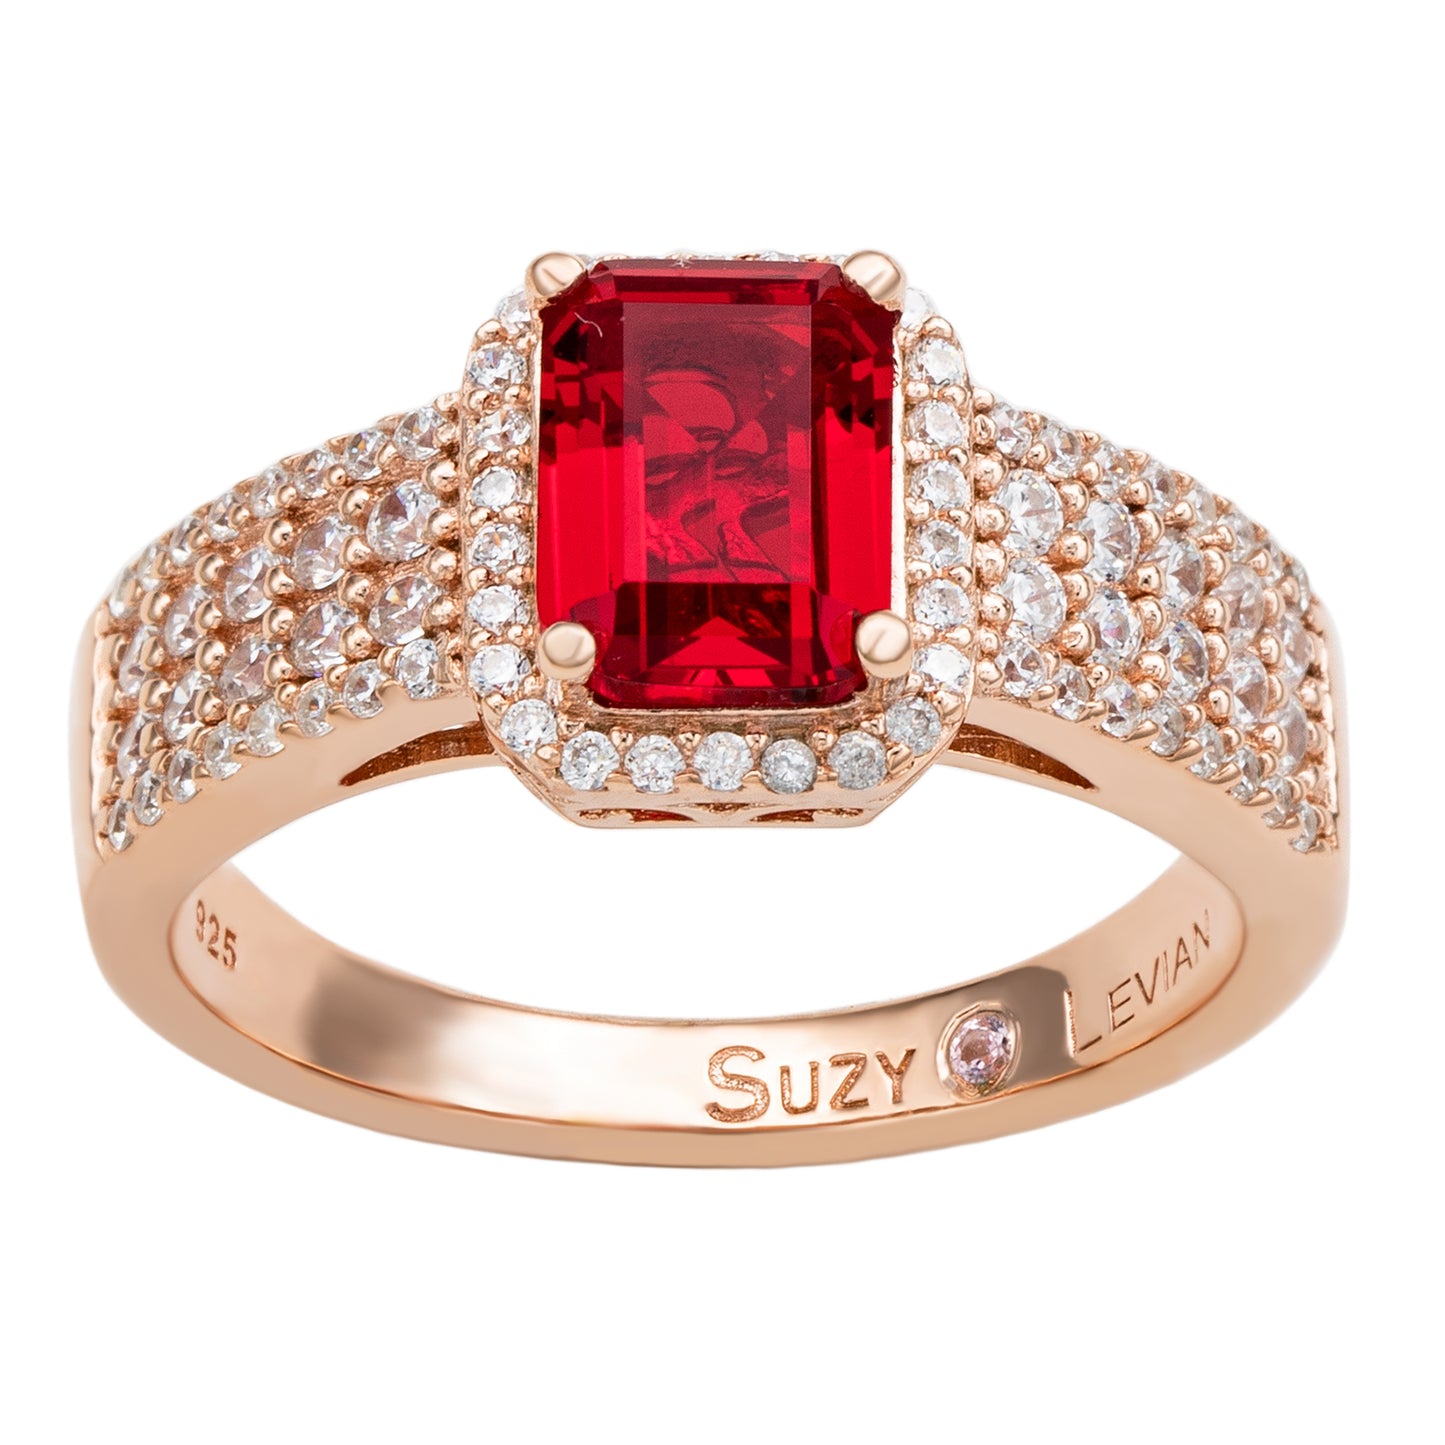 Suzy Levian Rose Sterling Silver Emerald-Cut Red and White Cubic Zirconia Halo Ring